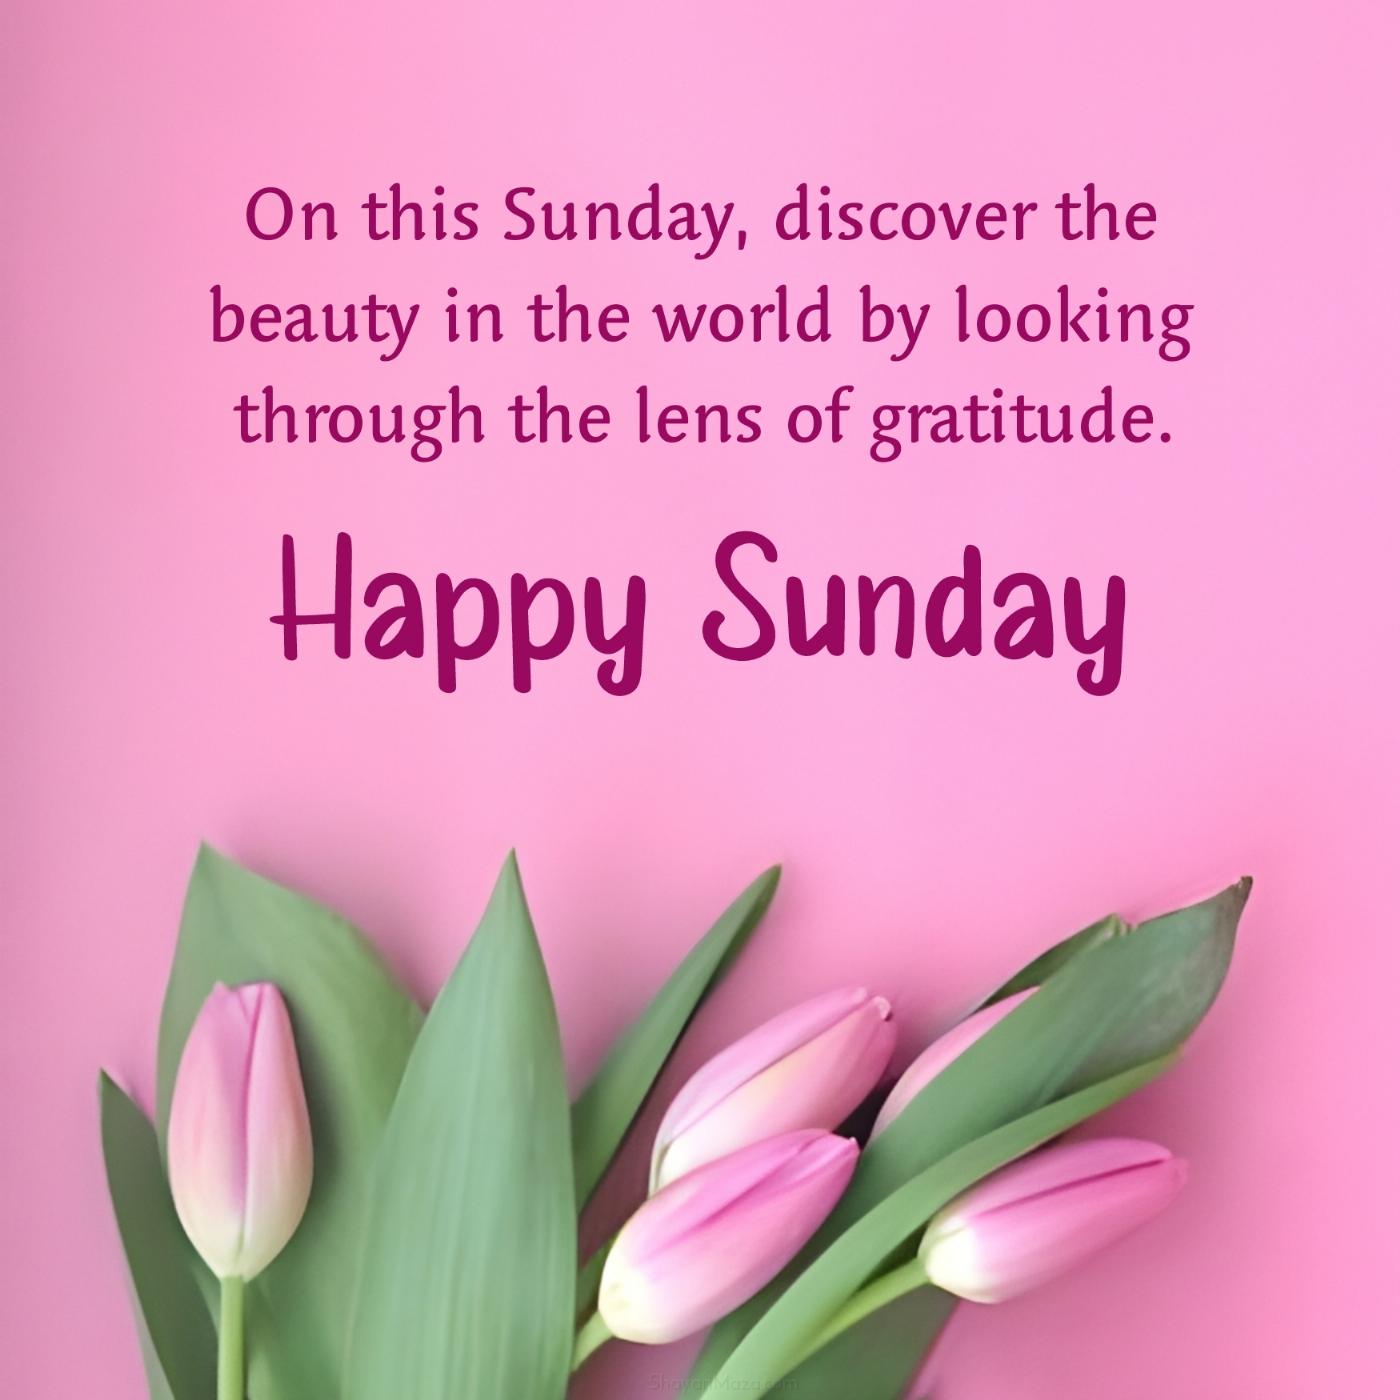 On this Sunday discover the beauty in the world